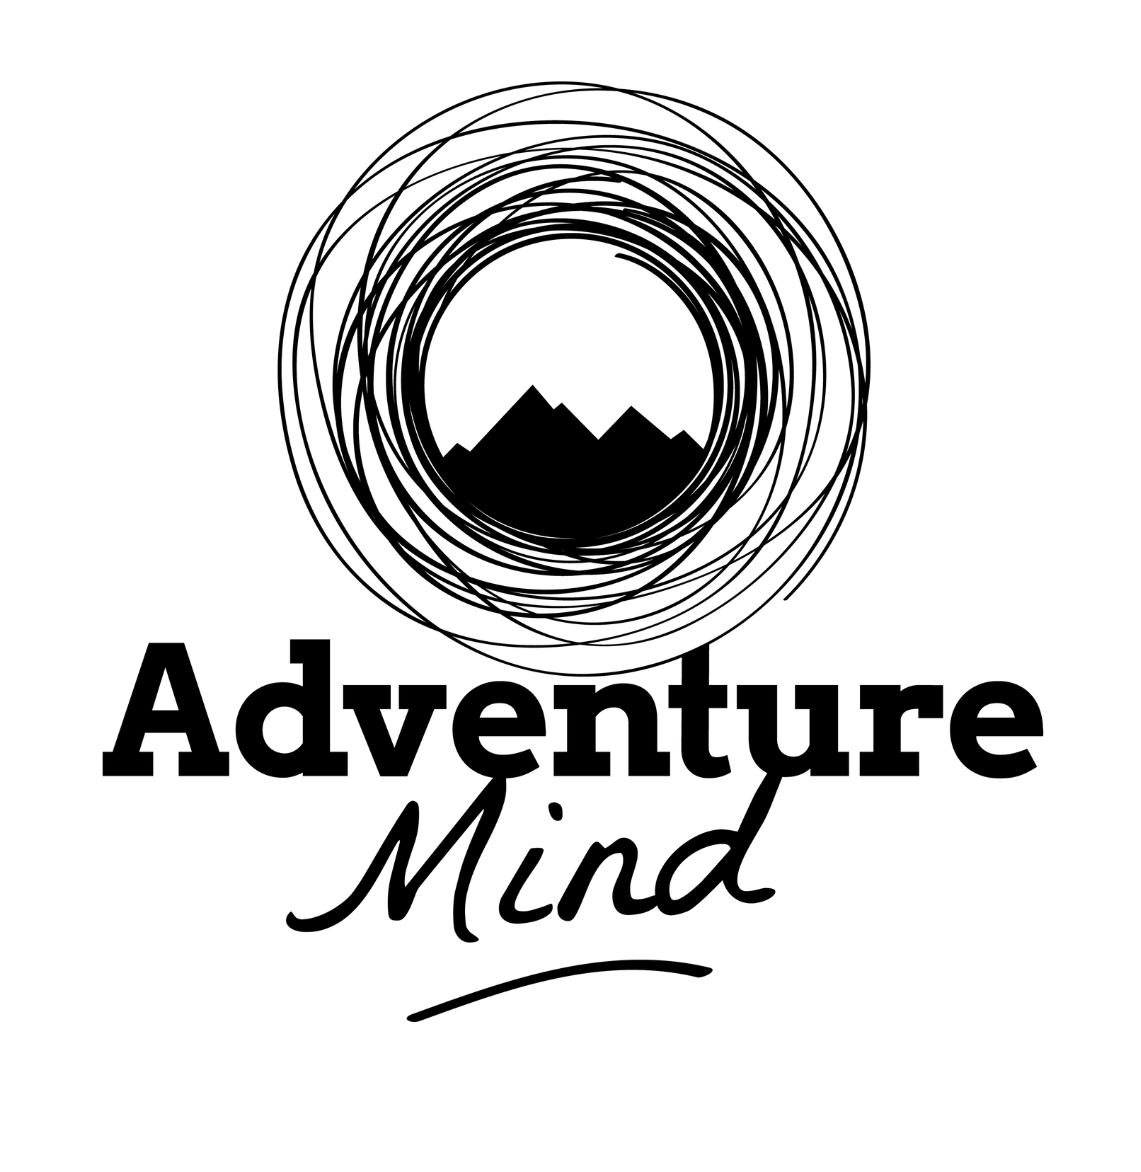 Final week to apply for the #AdventureMind #Grant Closing 17th April Funding available for individuals, families or small teams to undertake an adventure. Pls share with anyone who might benefit #Adventure #wellbeing #fund #grant explorersconnect.com/adventure-mind…